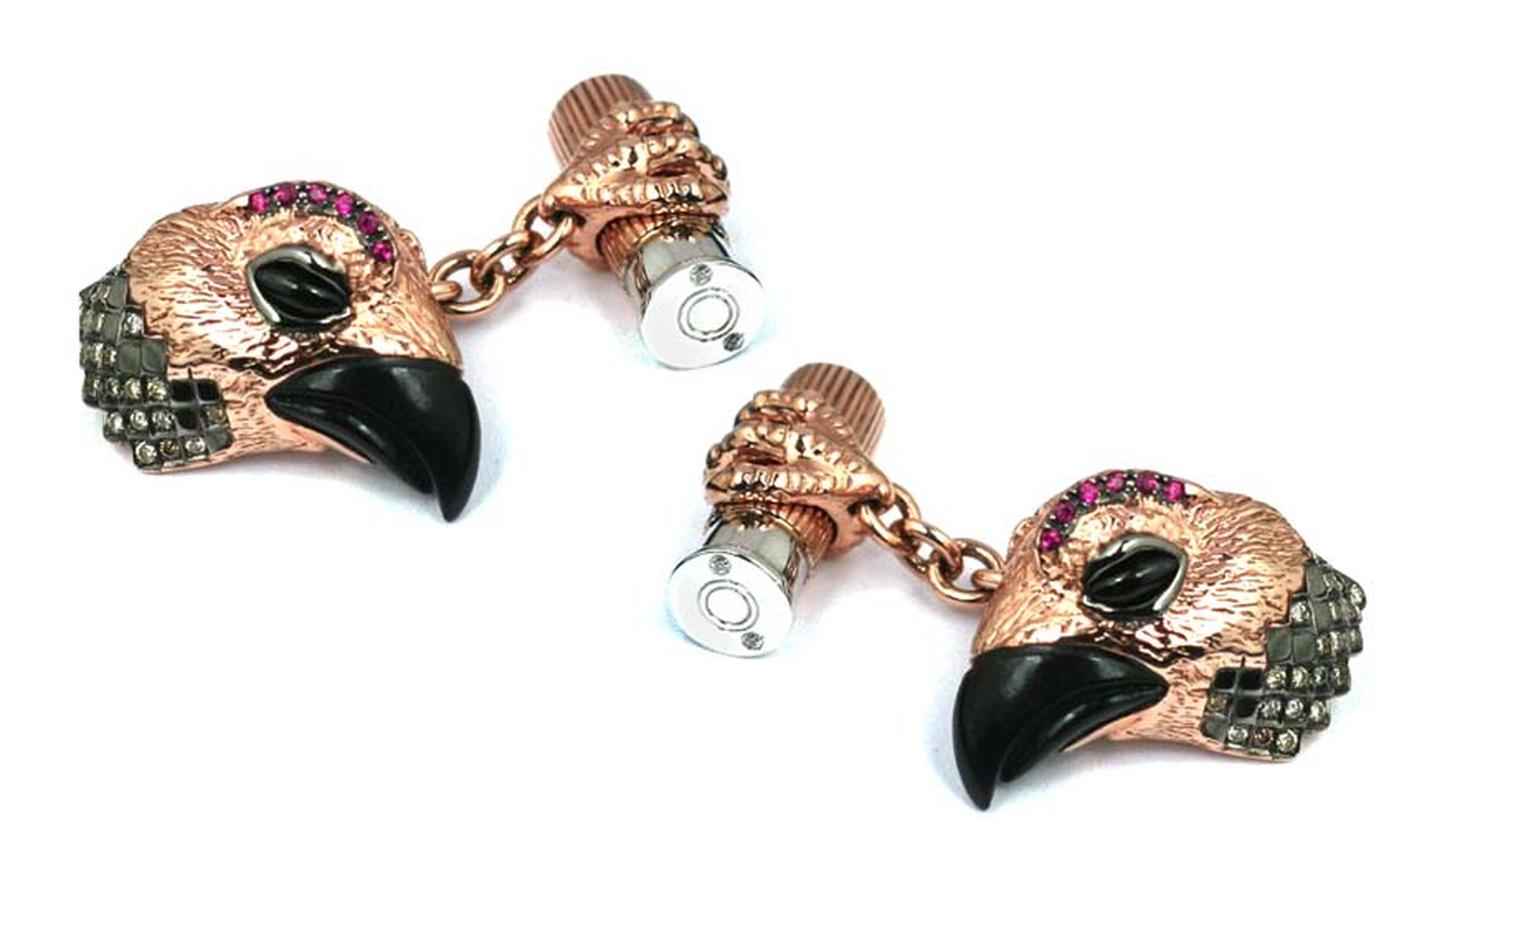 Tomasz Donocik Grouse cufflinks in rose gold with star diopside, black onyx, rubies and brown diamonds (£18,000)